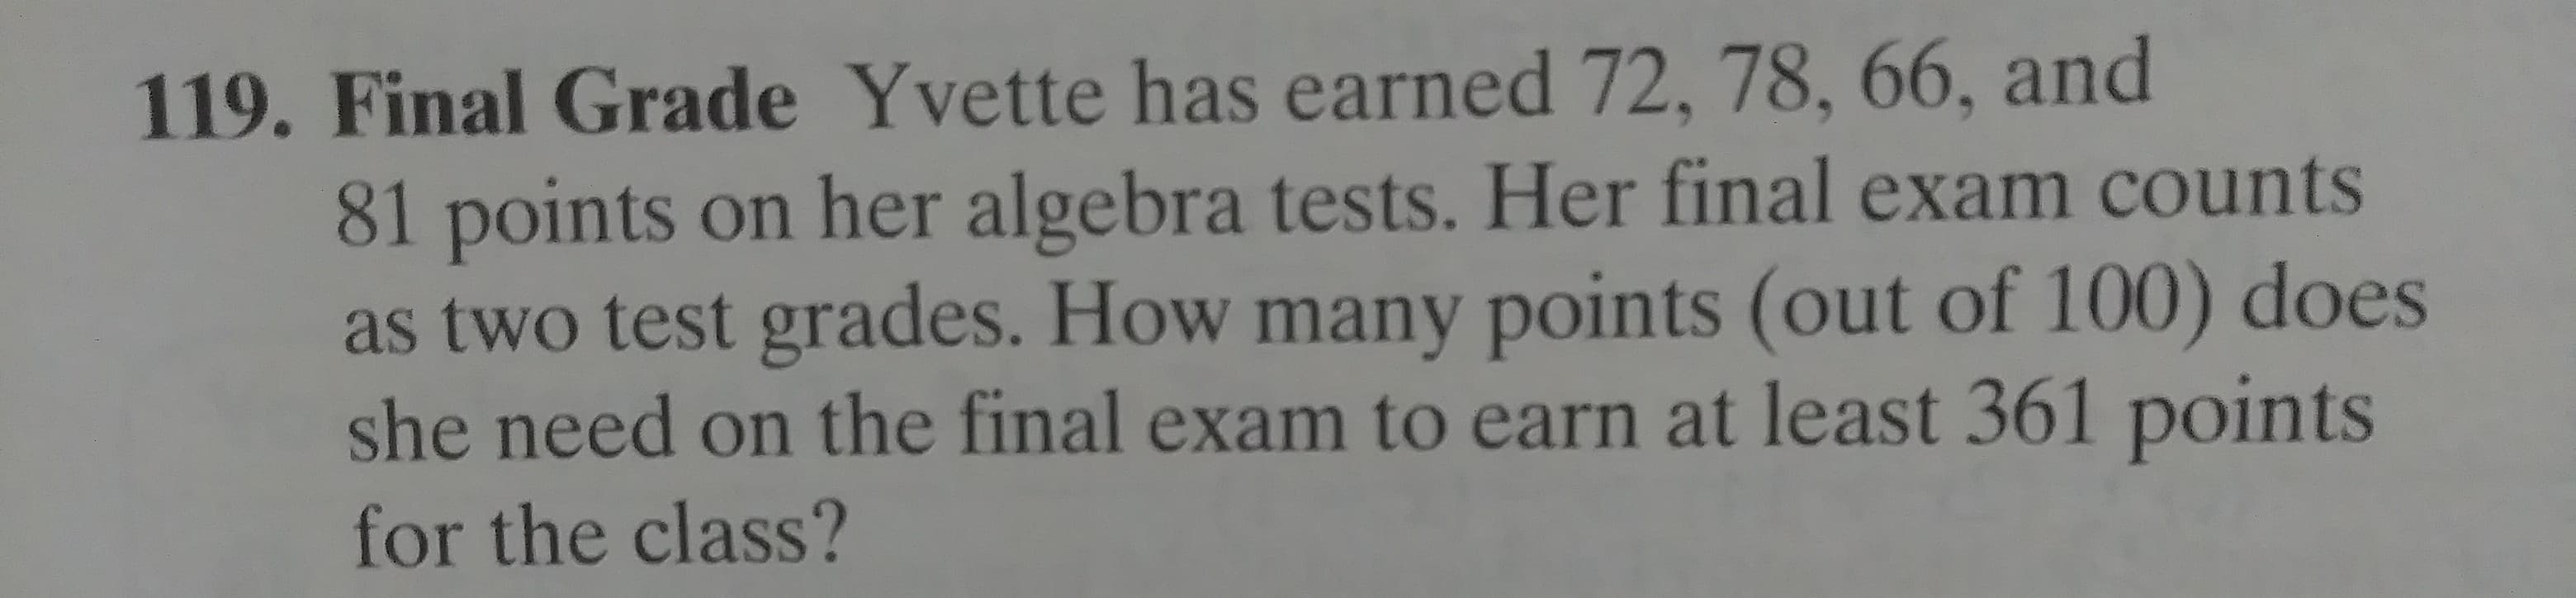 . Final Grade Yvette has earned 72, 78, 66, and
81 points on her algebra tests. Her final exam counts
as two test grades. How many points (out of 100) does
she need on the final exam to earn at least 361 points
for the class?
